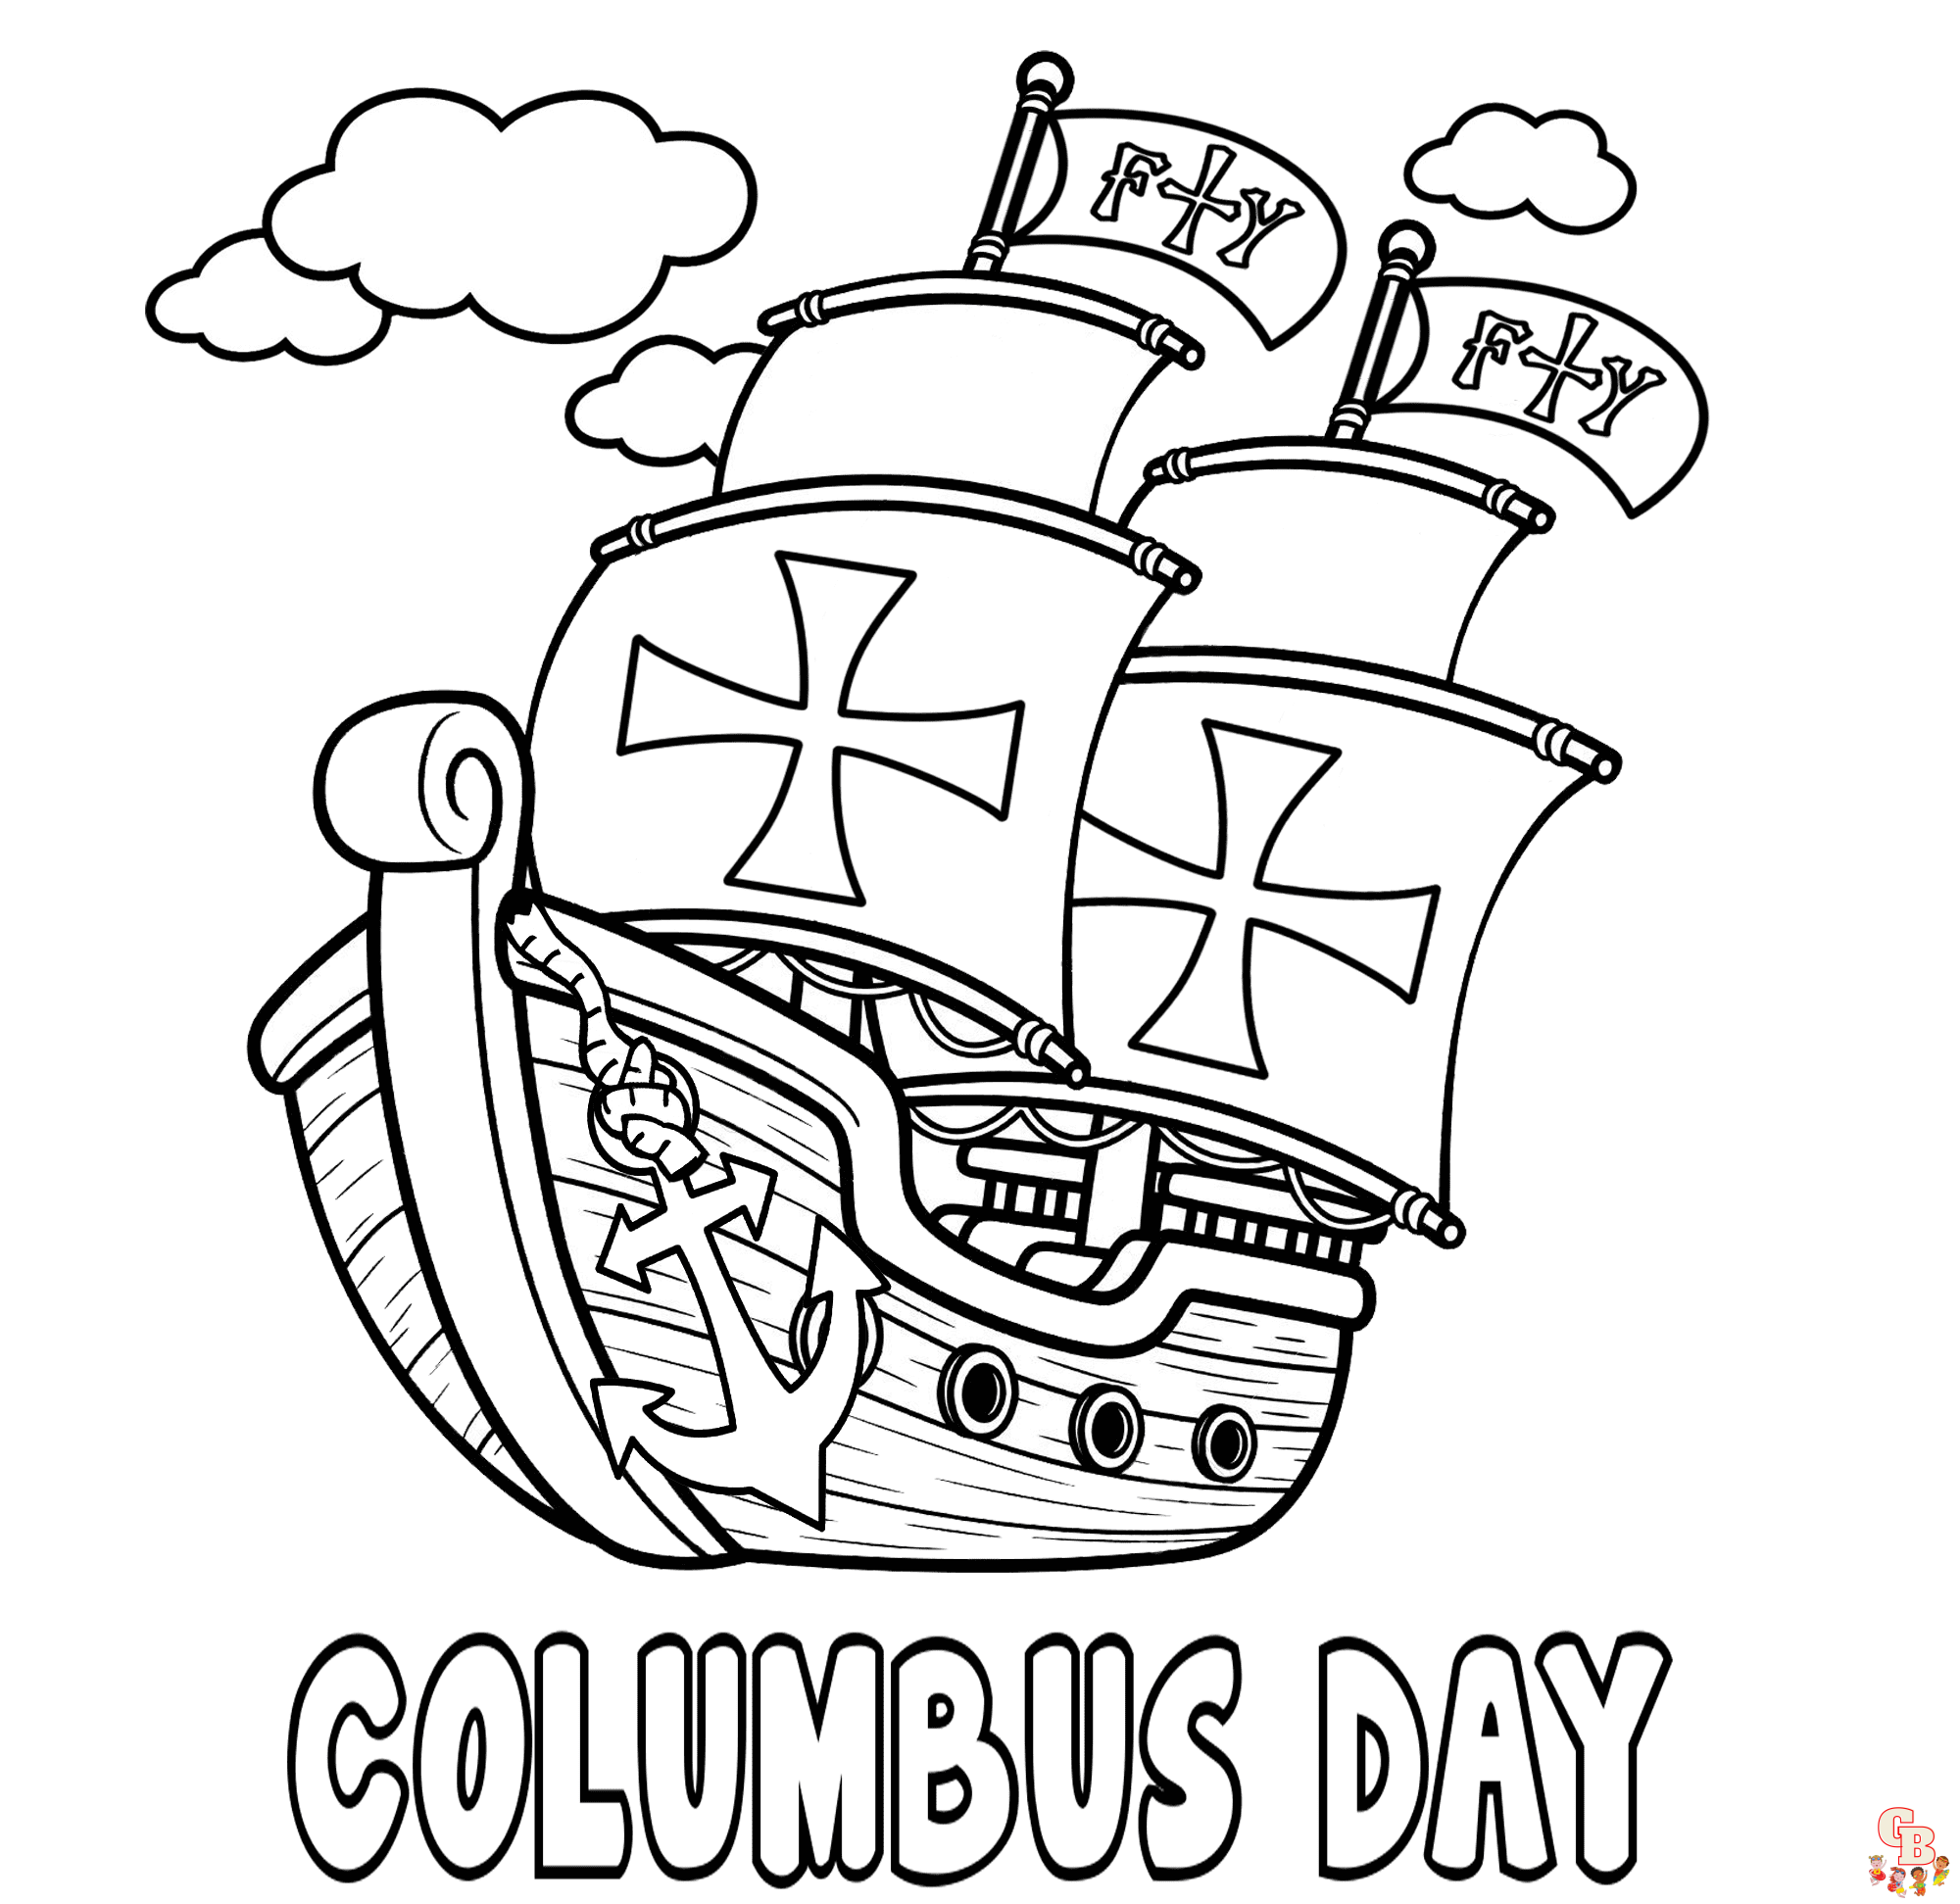 Columbus Day coloring pages free